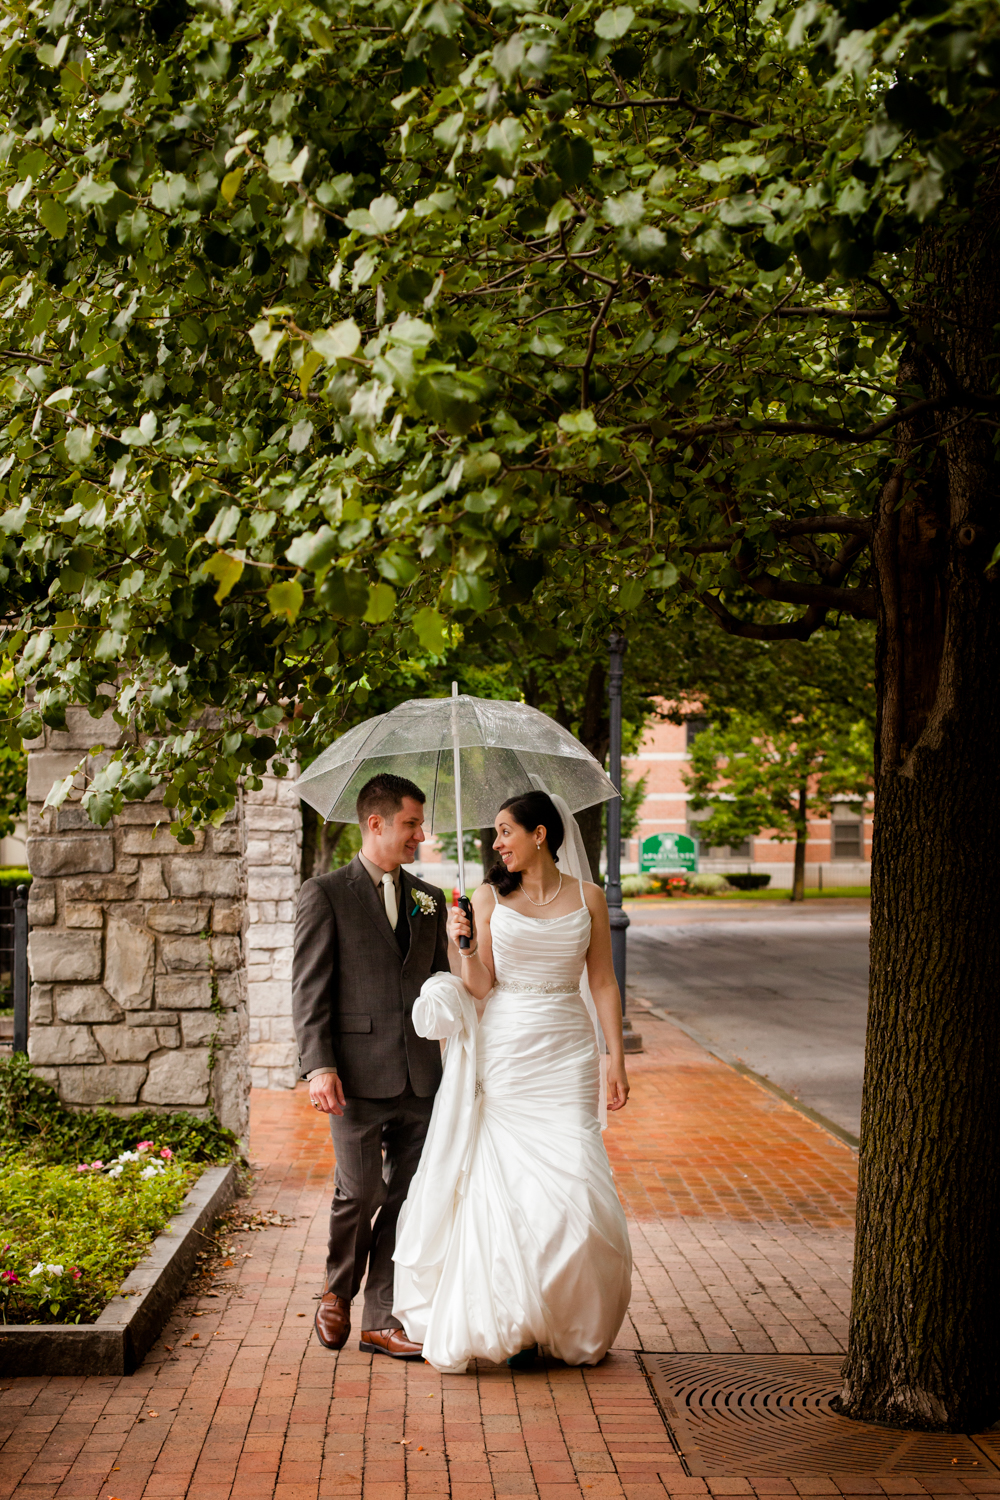  Bride and groom share a moment under an umbrella 